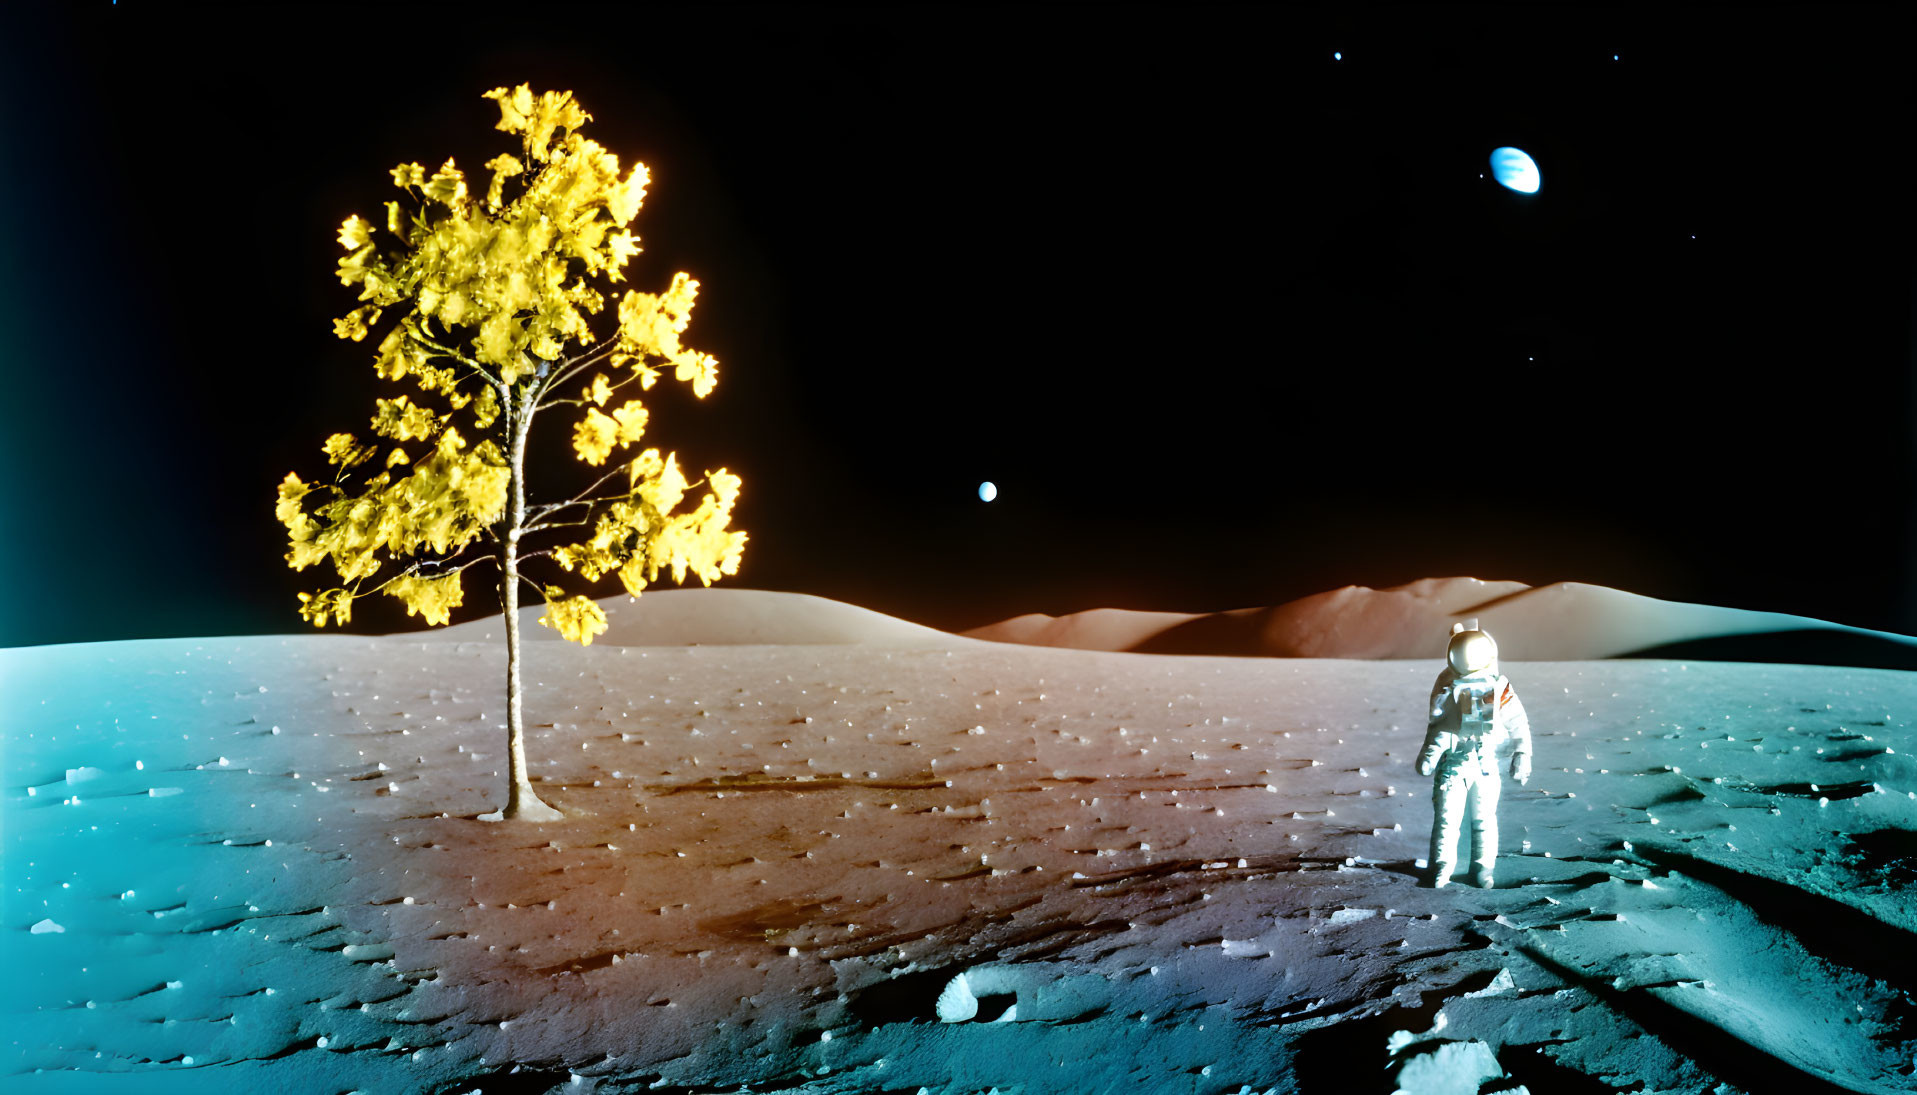 Astronaut on barren moon-like surface with lone yellow tree and Earth in the distance